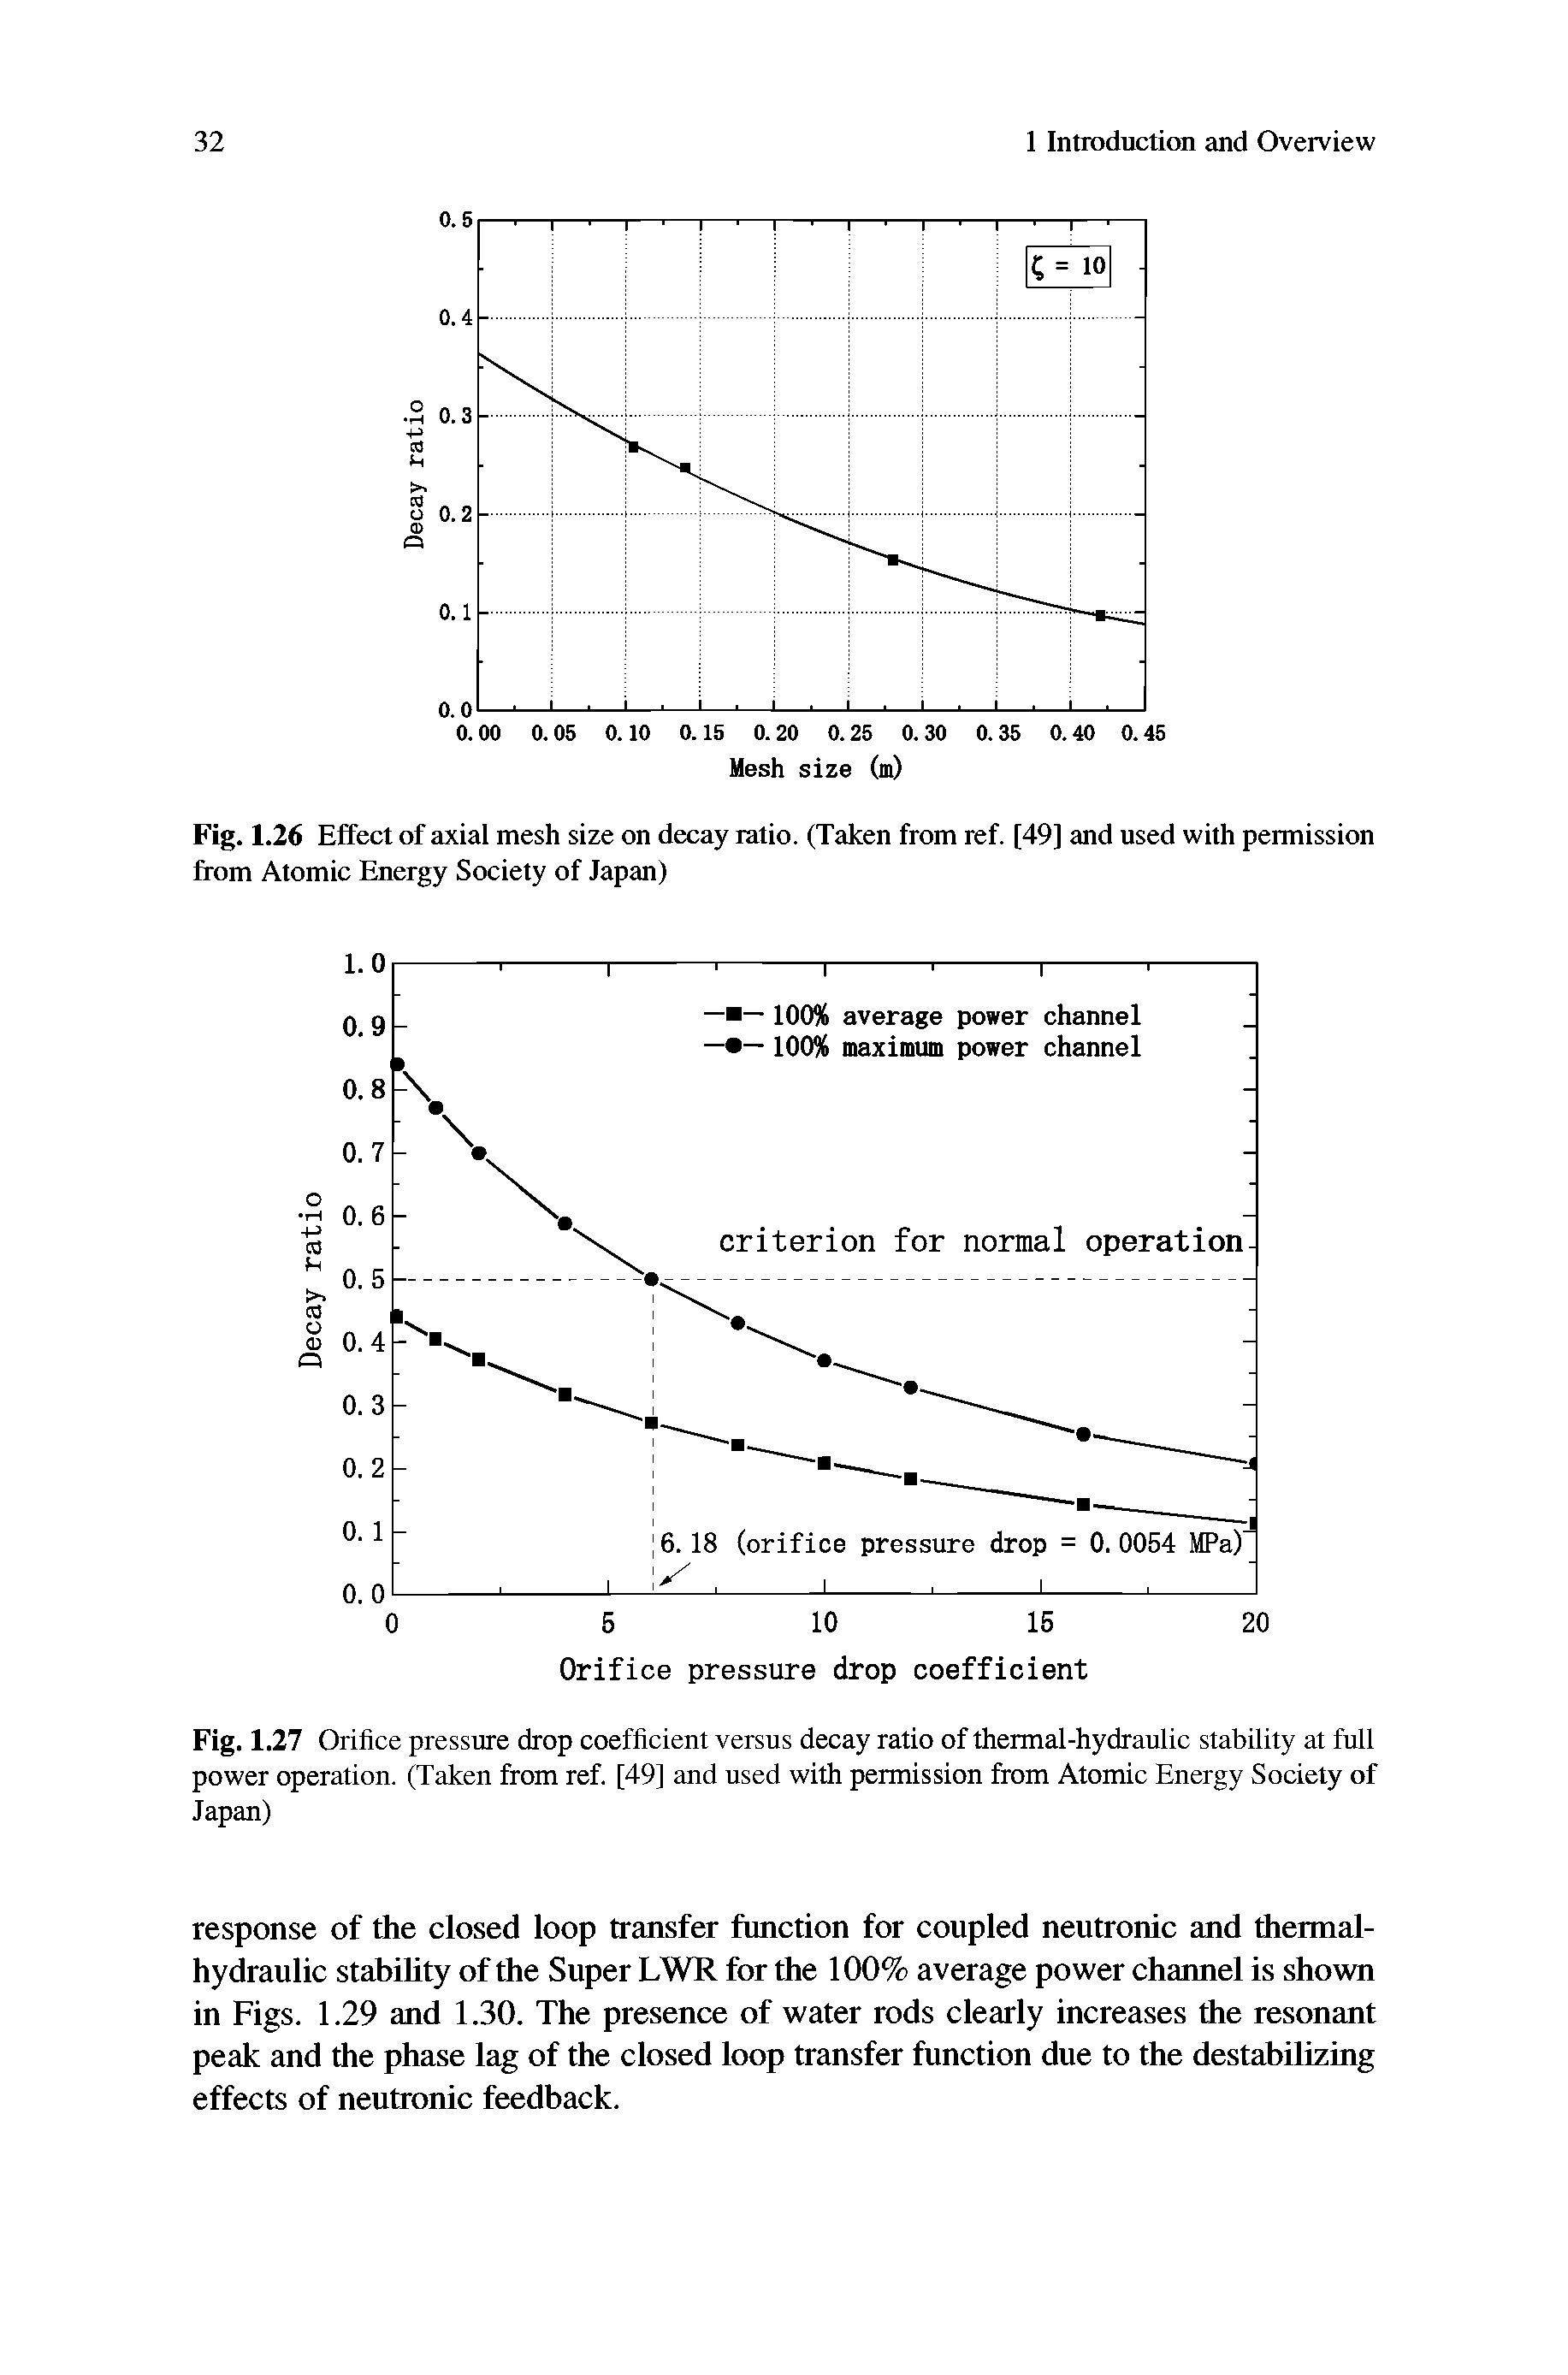 Fig. 1.27 Orifice pressure drop coefficient versus decay ratio of thermal-hydraulic stability at full power operation. (Taken from ref. [49] and used with permission from Atomic Energy Society of Japan)...